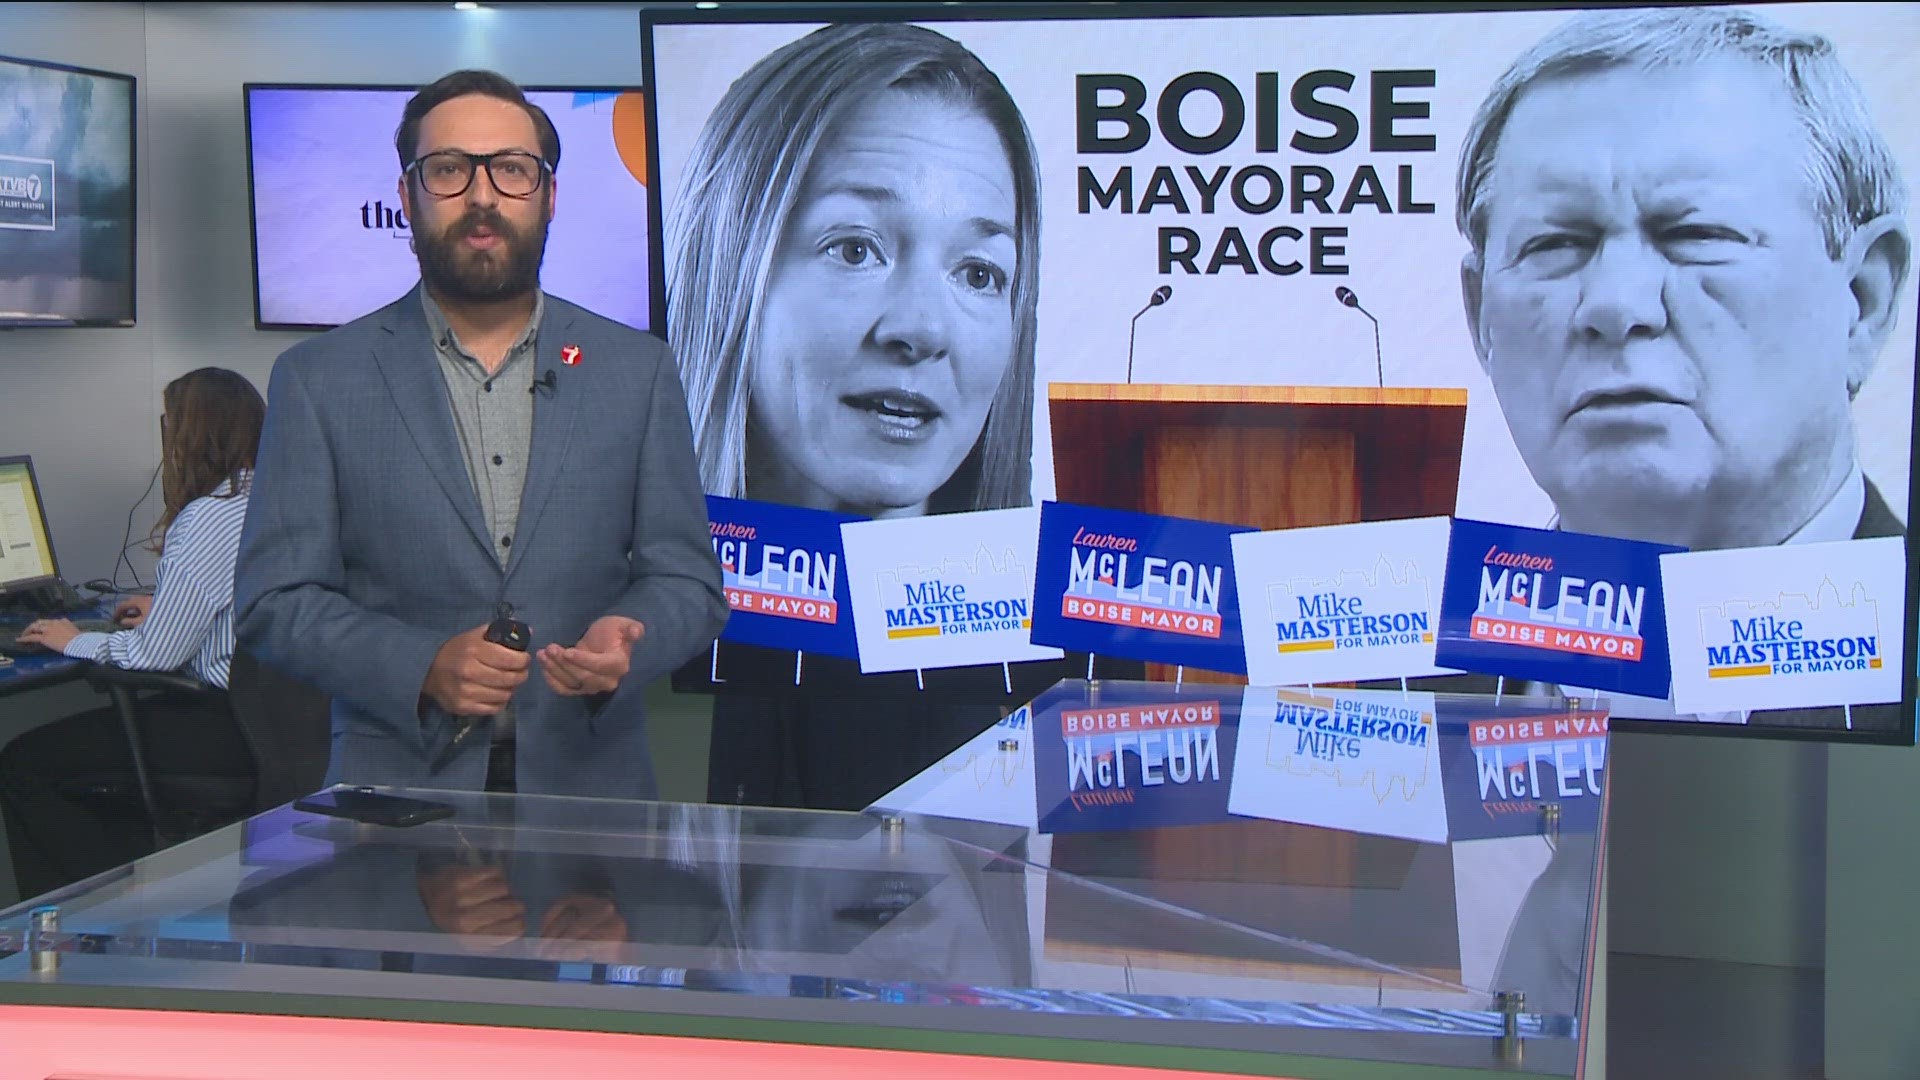 Boise mayoral race heats up with 41 days remaining on campaign